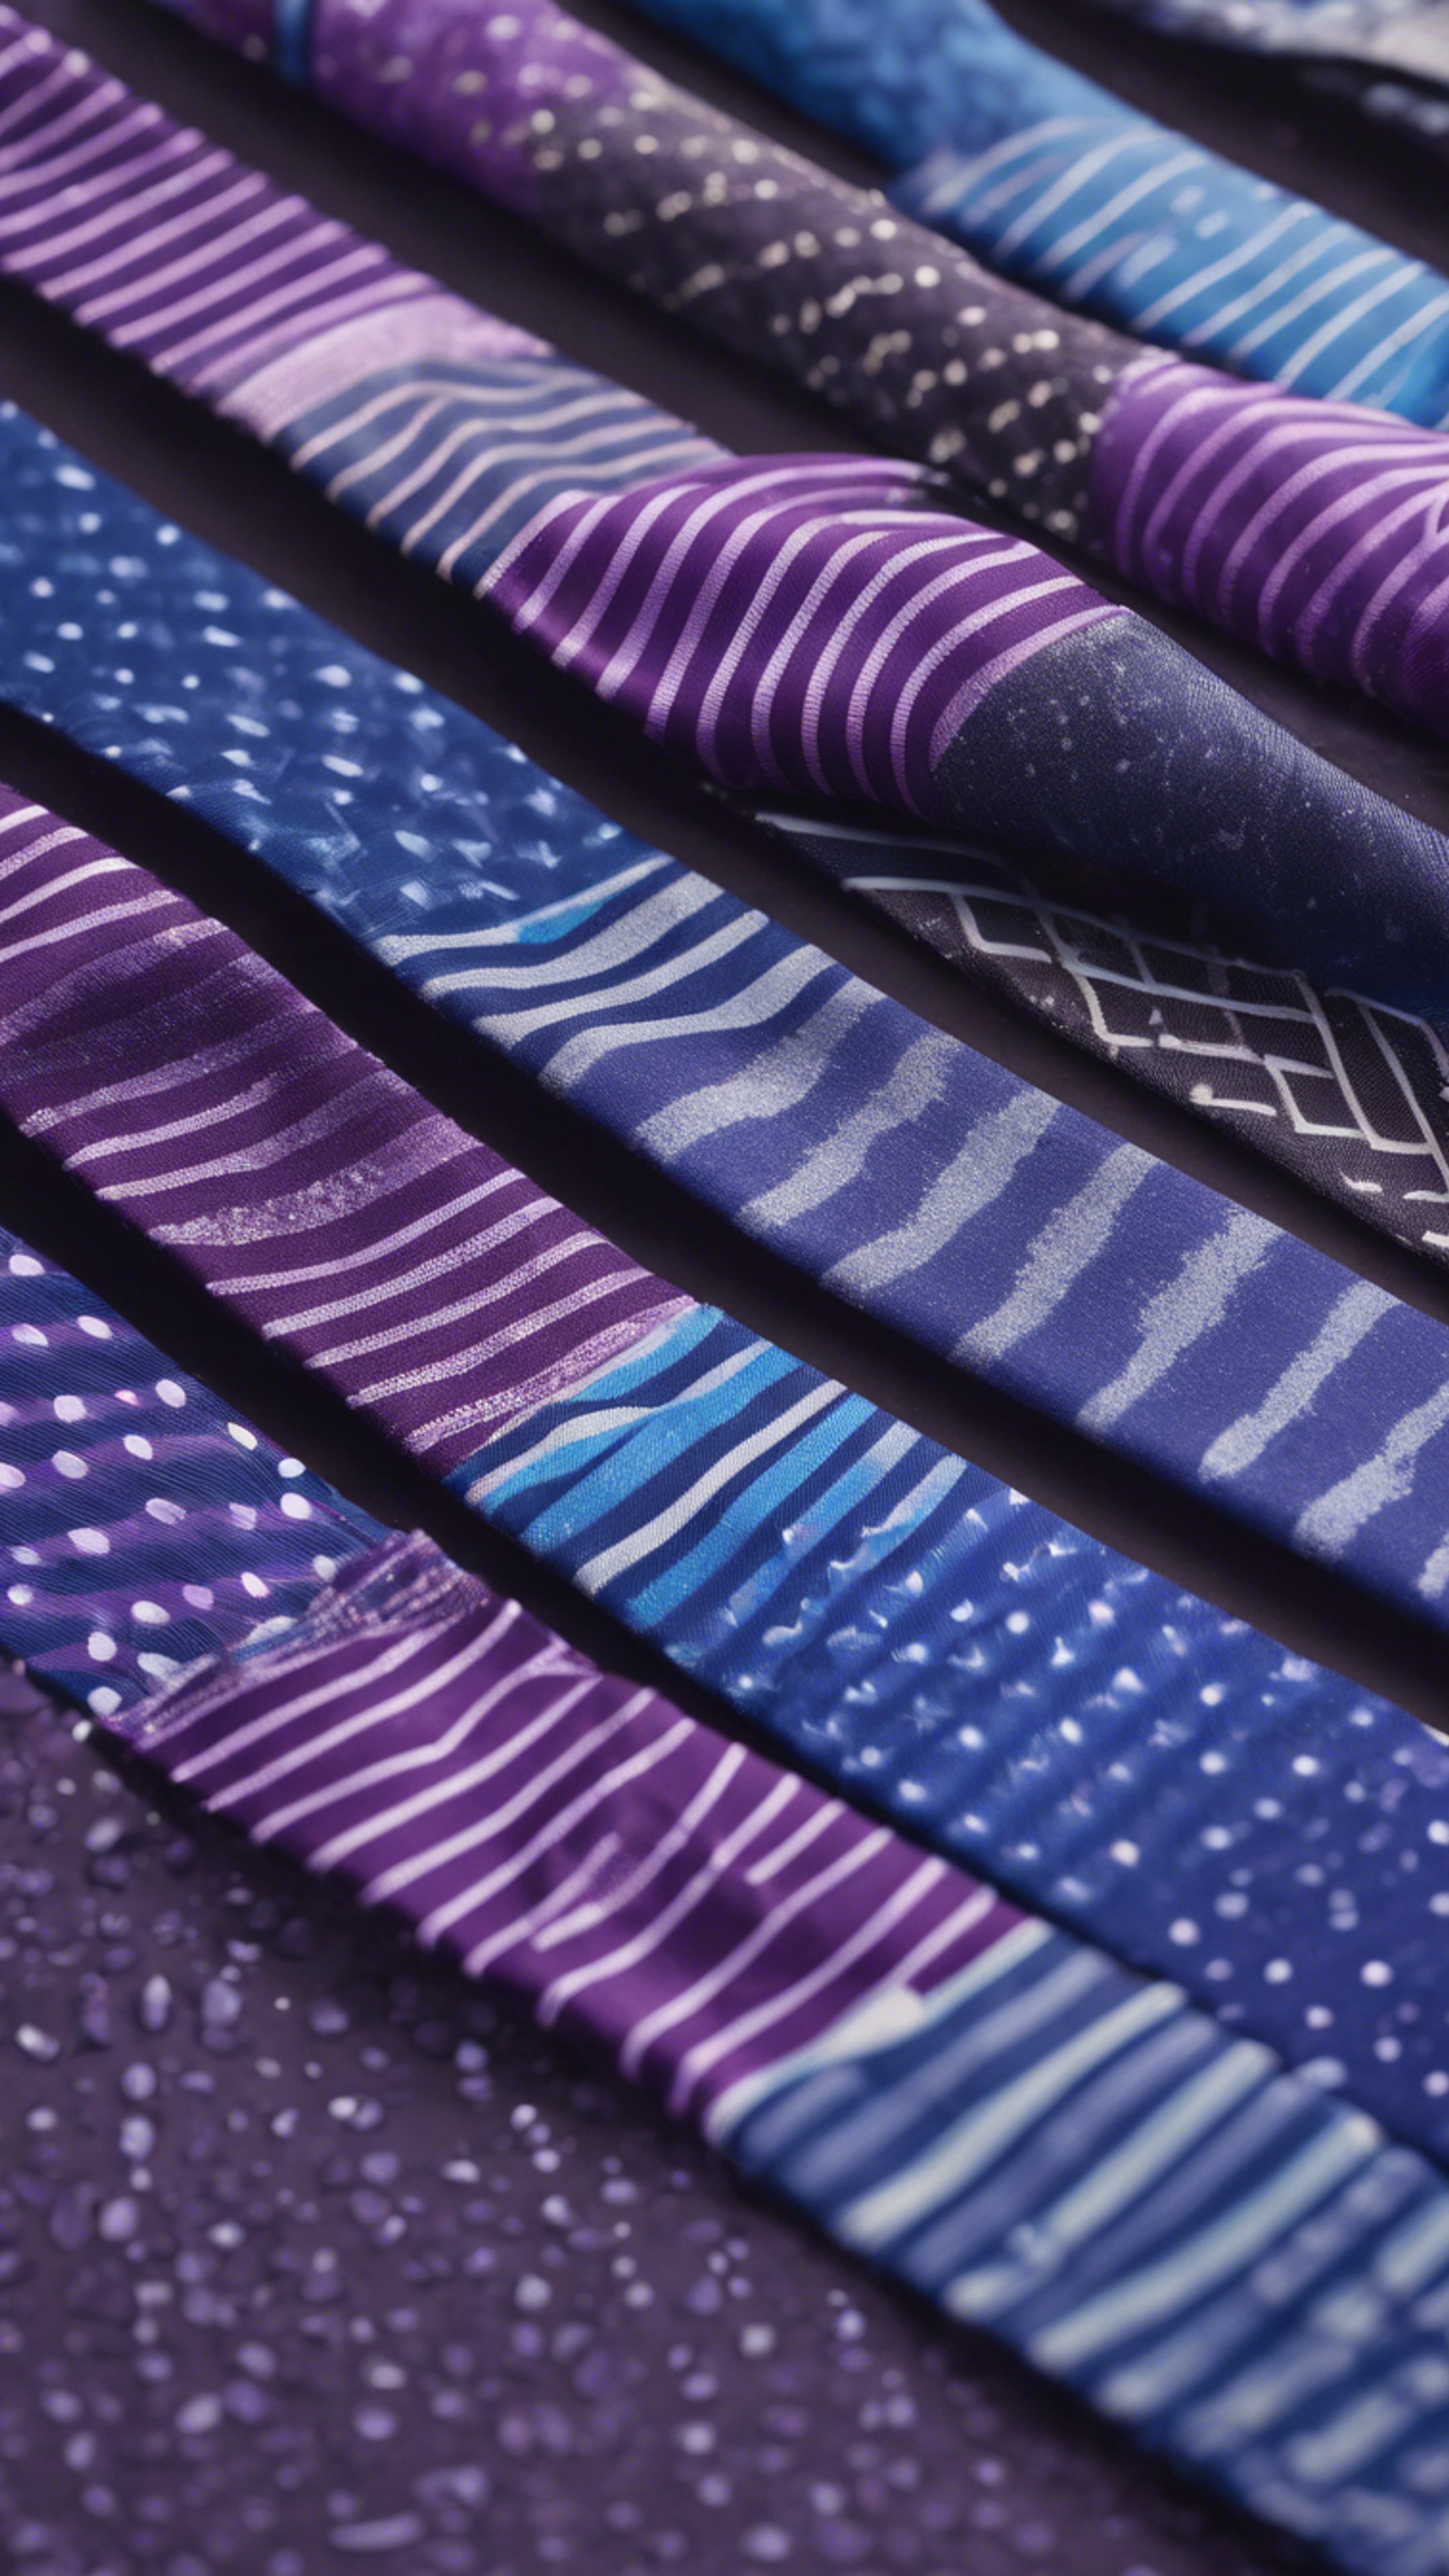 An amusing blend of blue and purple preppy ties diagonally arranged to cover the frame.壁紙[cd774b3d264b4506b753]